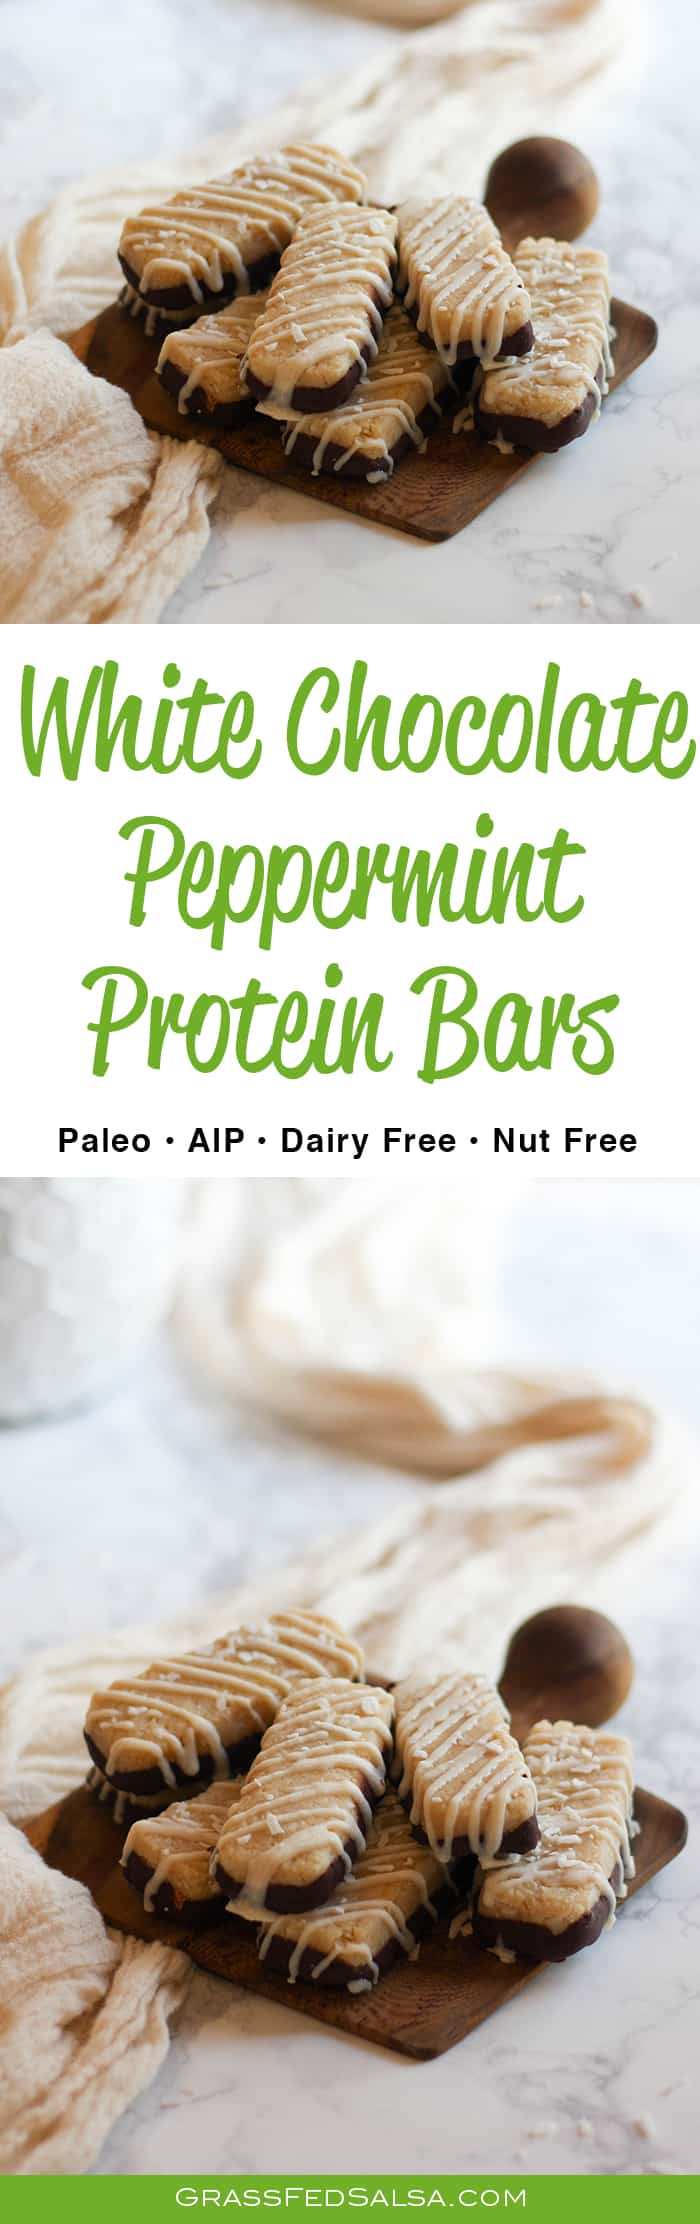 This White Chocolate Mint Collagen Protein Bar recipe is both Paleo and Autoimmune Protocol (AIP) compliant. A healthy addition to your holiday breakfast routine!